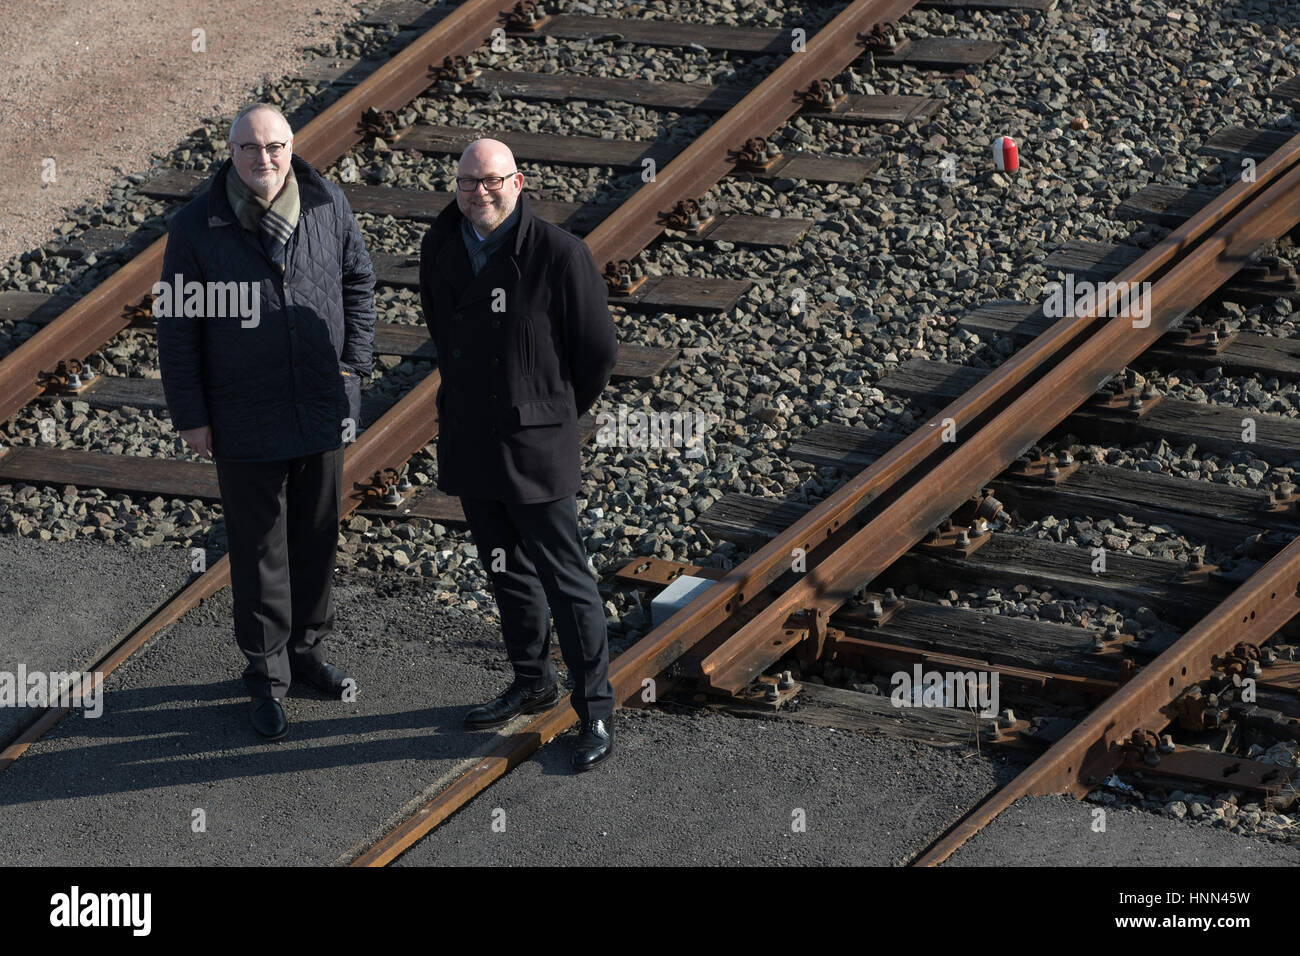 Hamburg, Germany. 15th Feb, 2017. Ingo Egloff (L) and Axel Mattern, Chiefs of Port of Hamburg Marketing, stand at the site of the Eurokombi logistics company during a press conference in the Port of Hamburg, Germany, 15 February 2017. The Port of Hamburg had a slight increase in turnover thanks to a strong final spurt last year. Photo: Christian Charisius/dpa/Alamy Live News Stock Photo